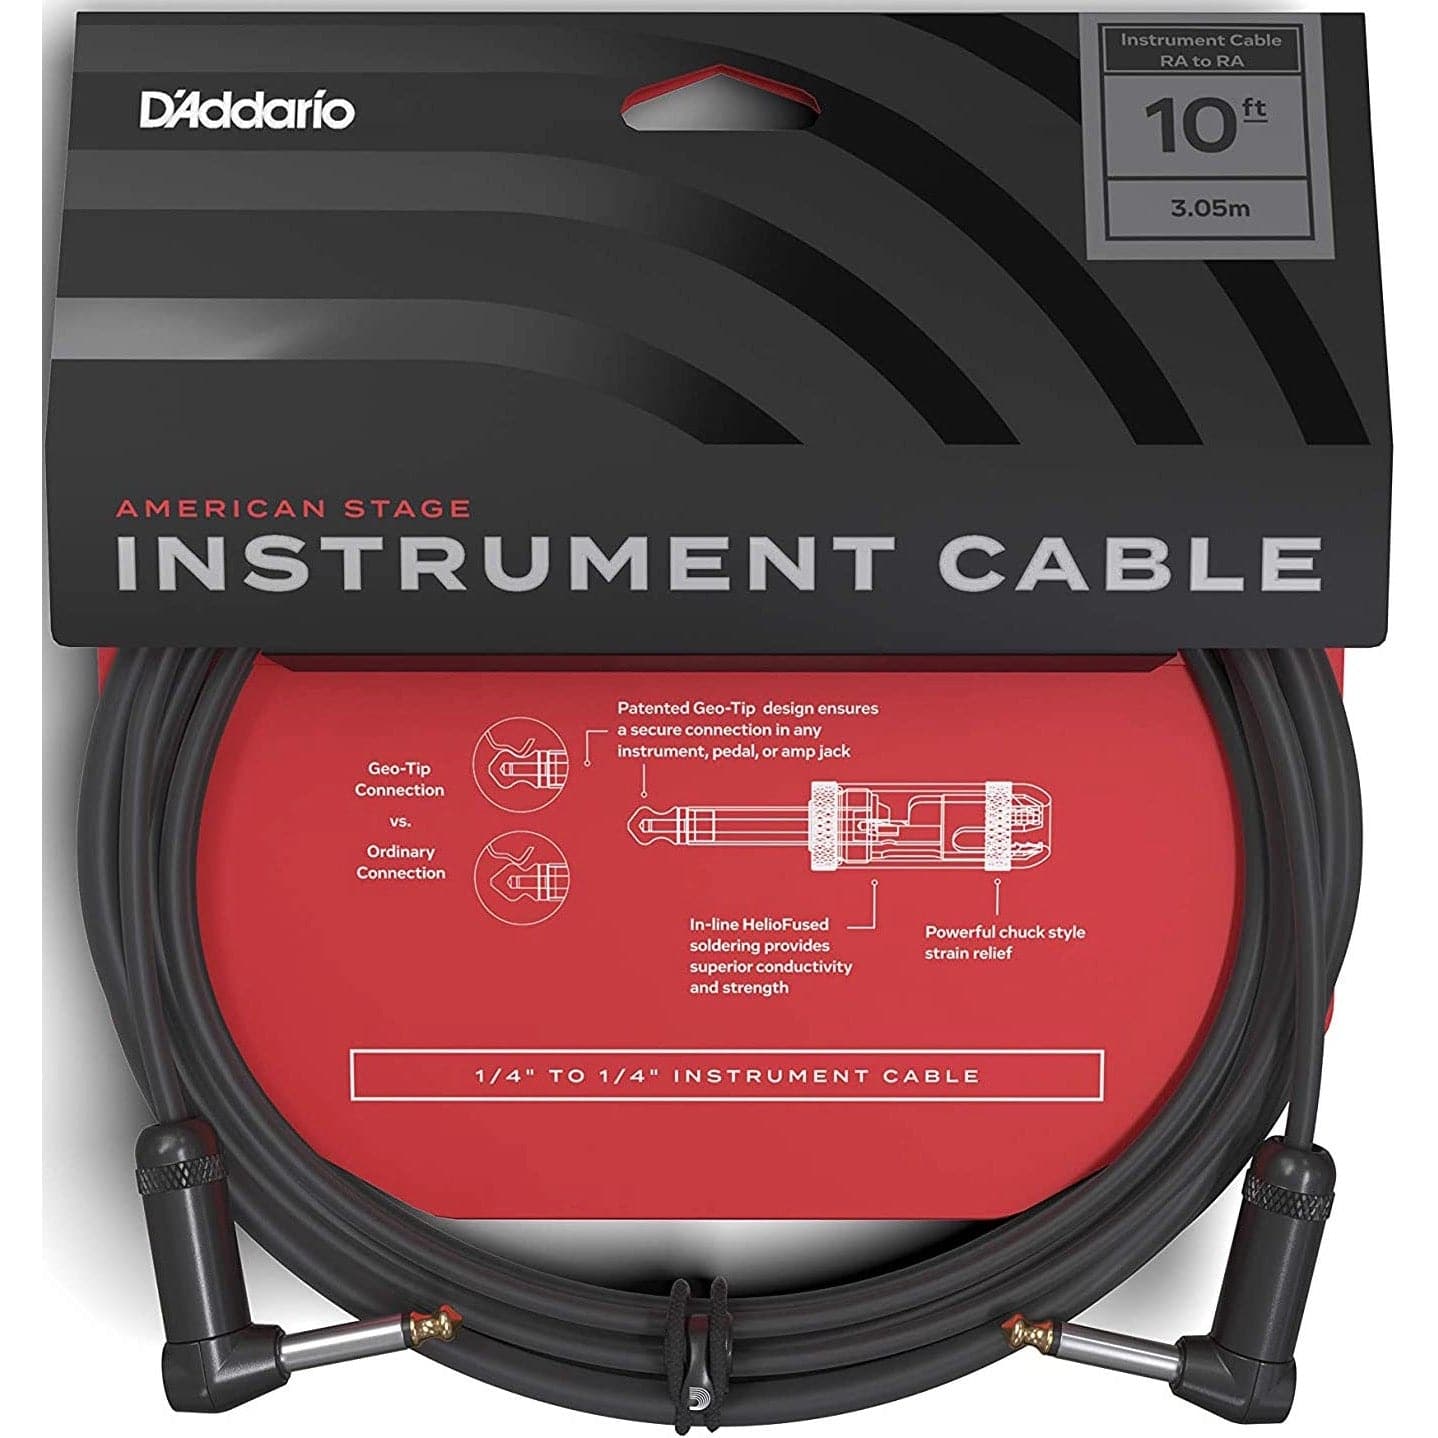 D'Addario American Stage Instrument Cable - 10ft (3meters) - Dual Right Angle